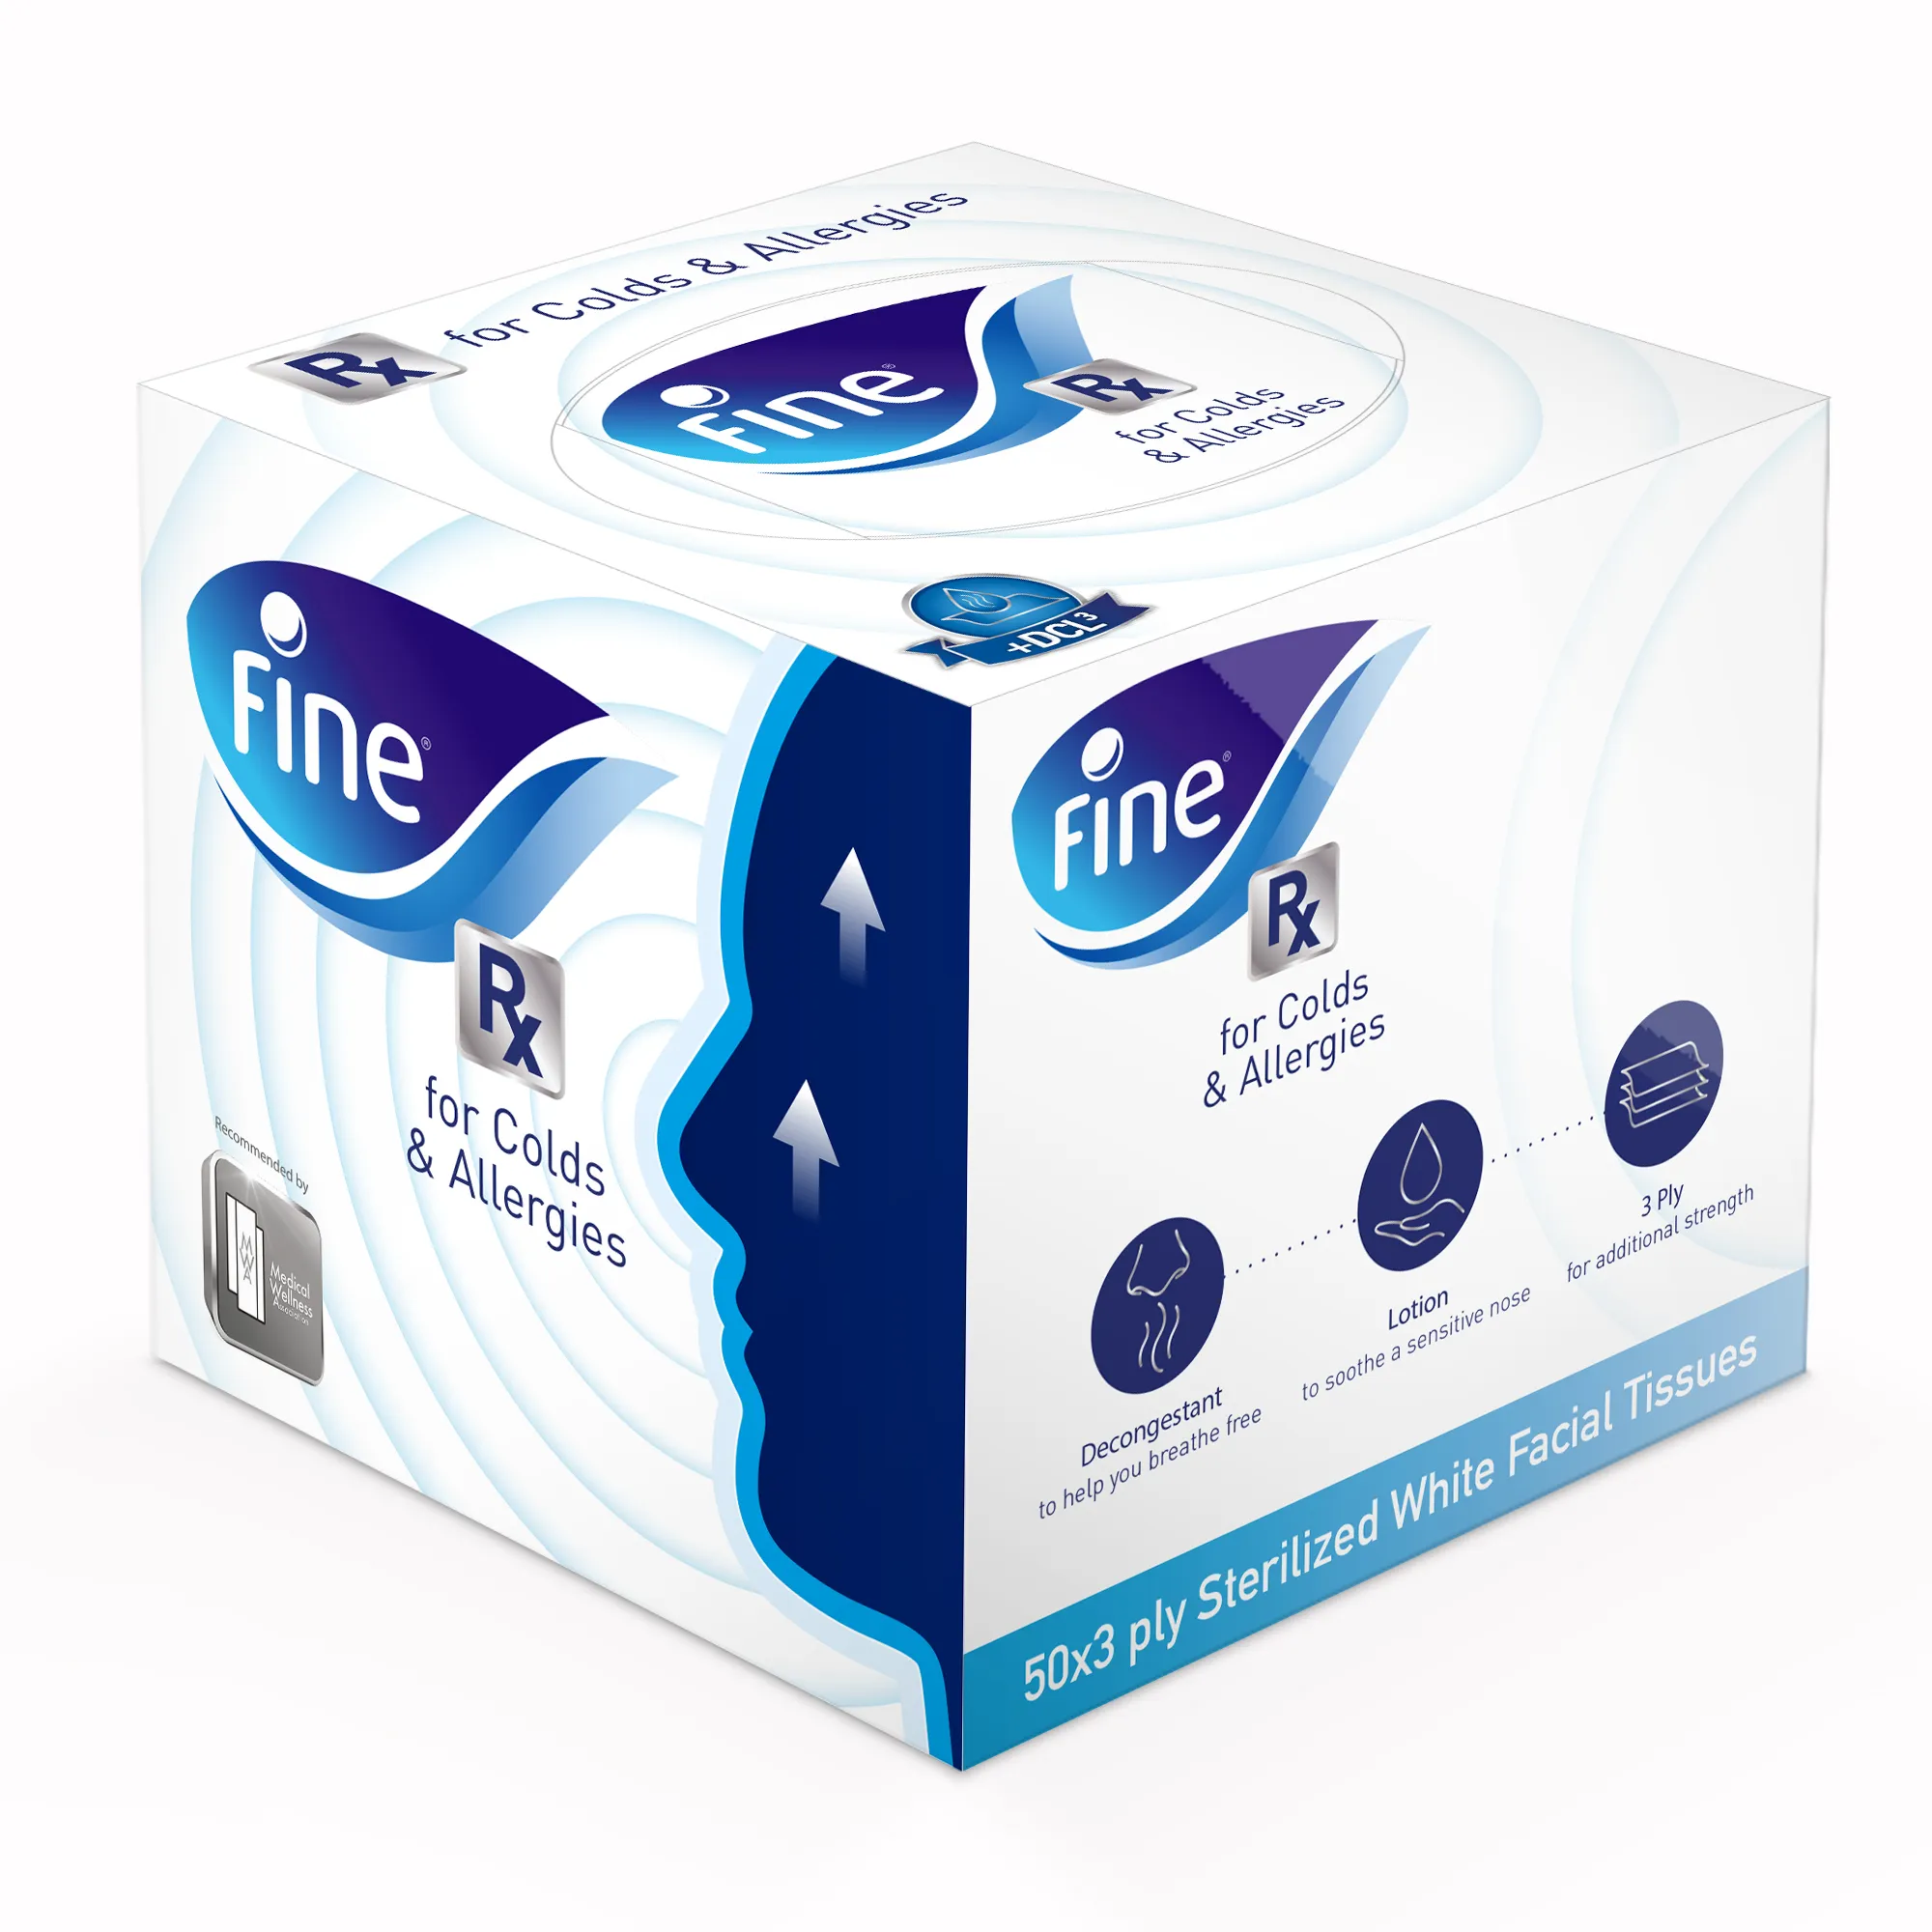 FINE RX Sterilized Facial Tissues for Flu & Allergies, Single Pack, 50 x 3ply